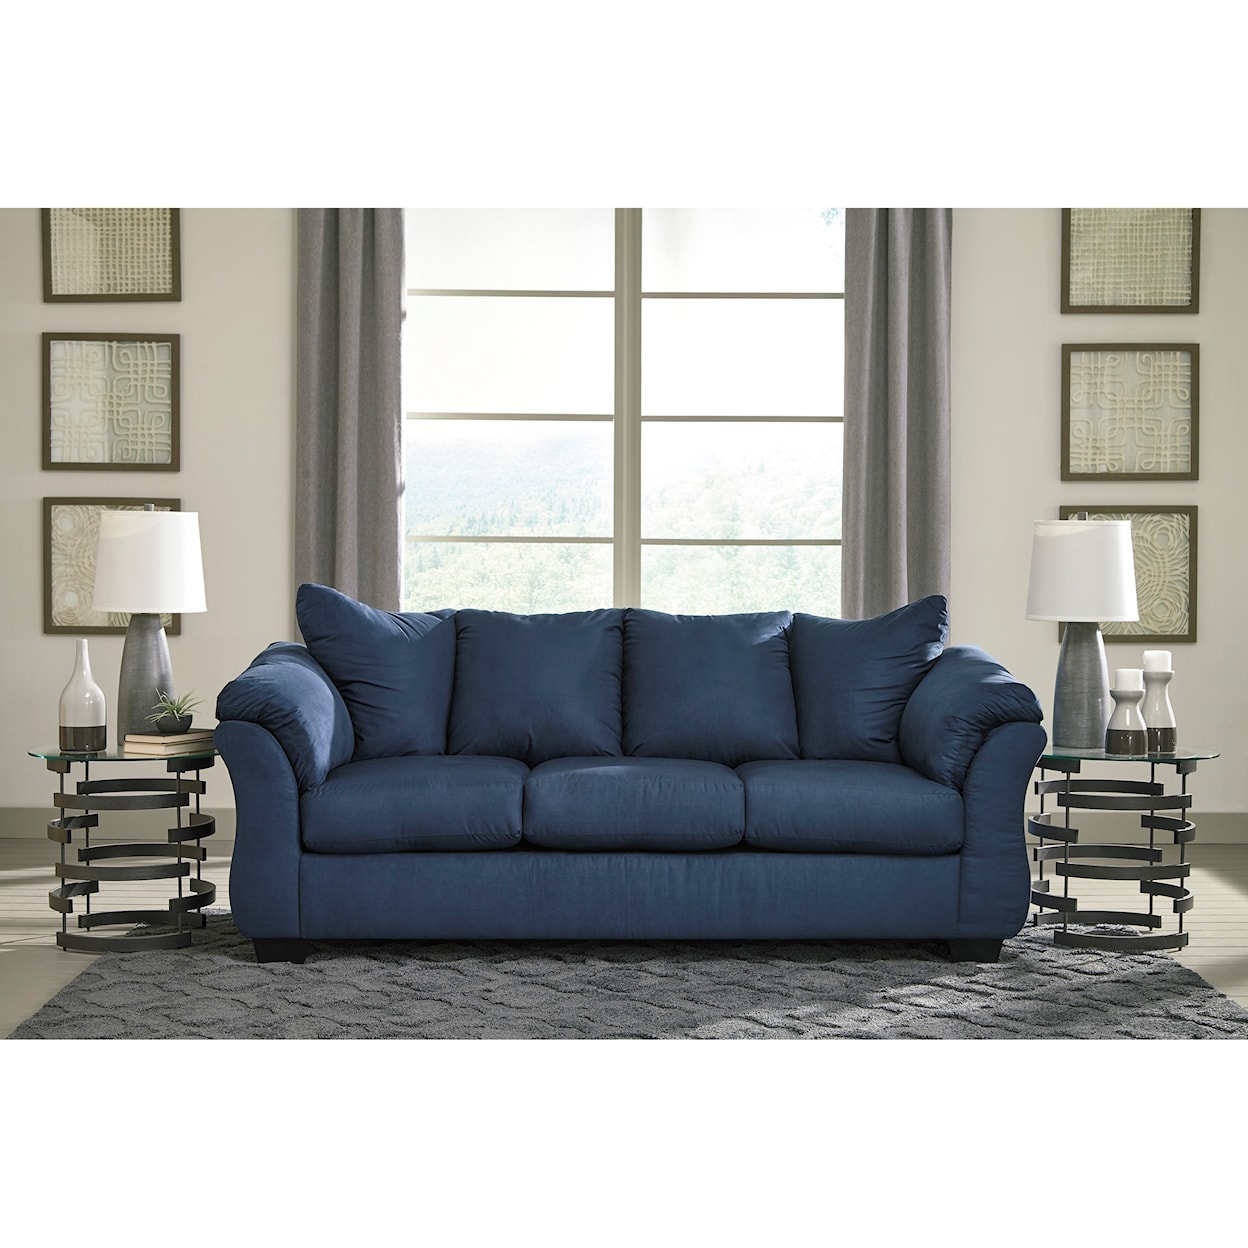 Signature Design by Ashley Furniture Darcy Stationary Sofa